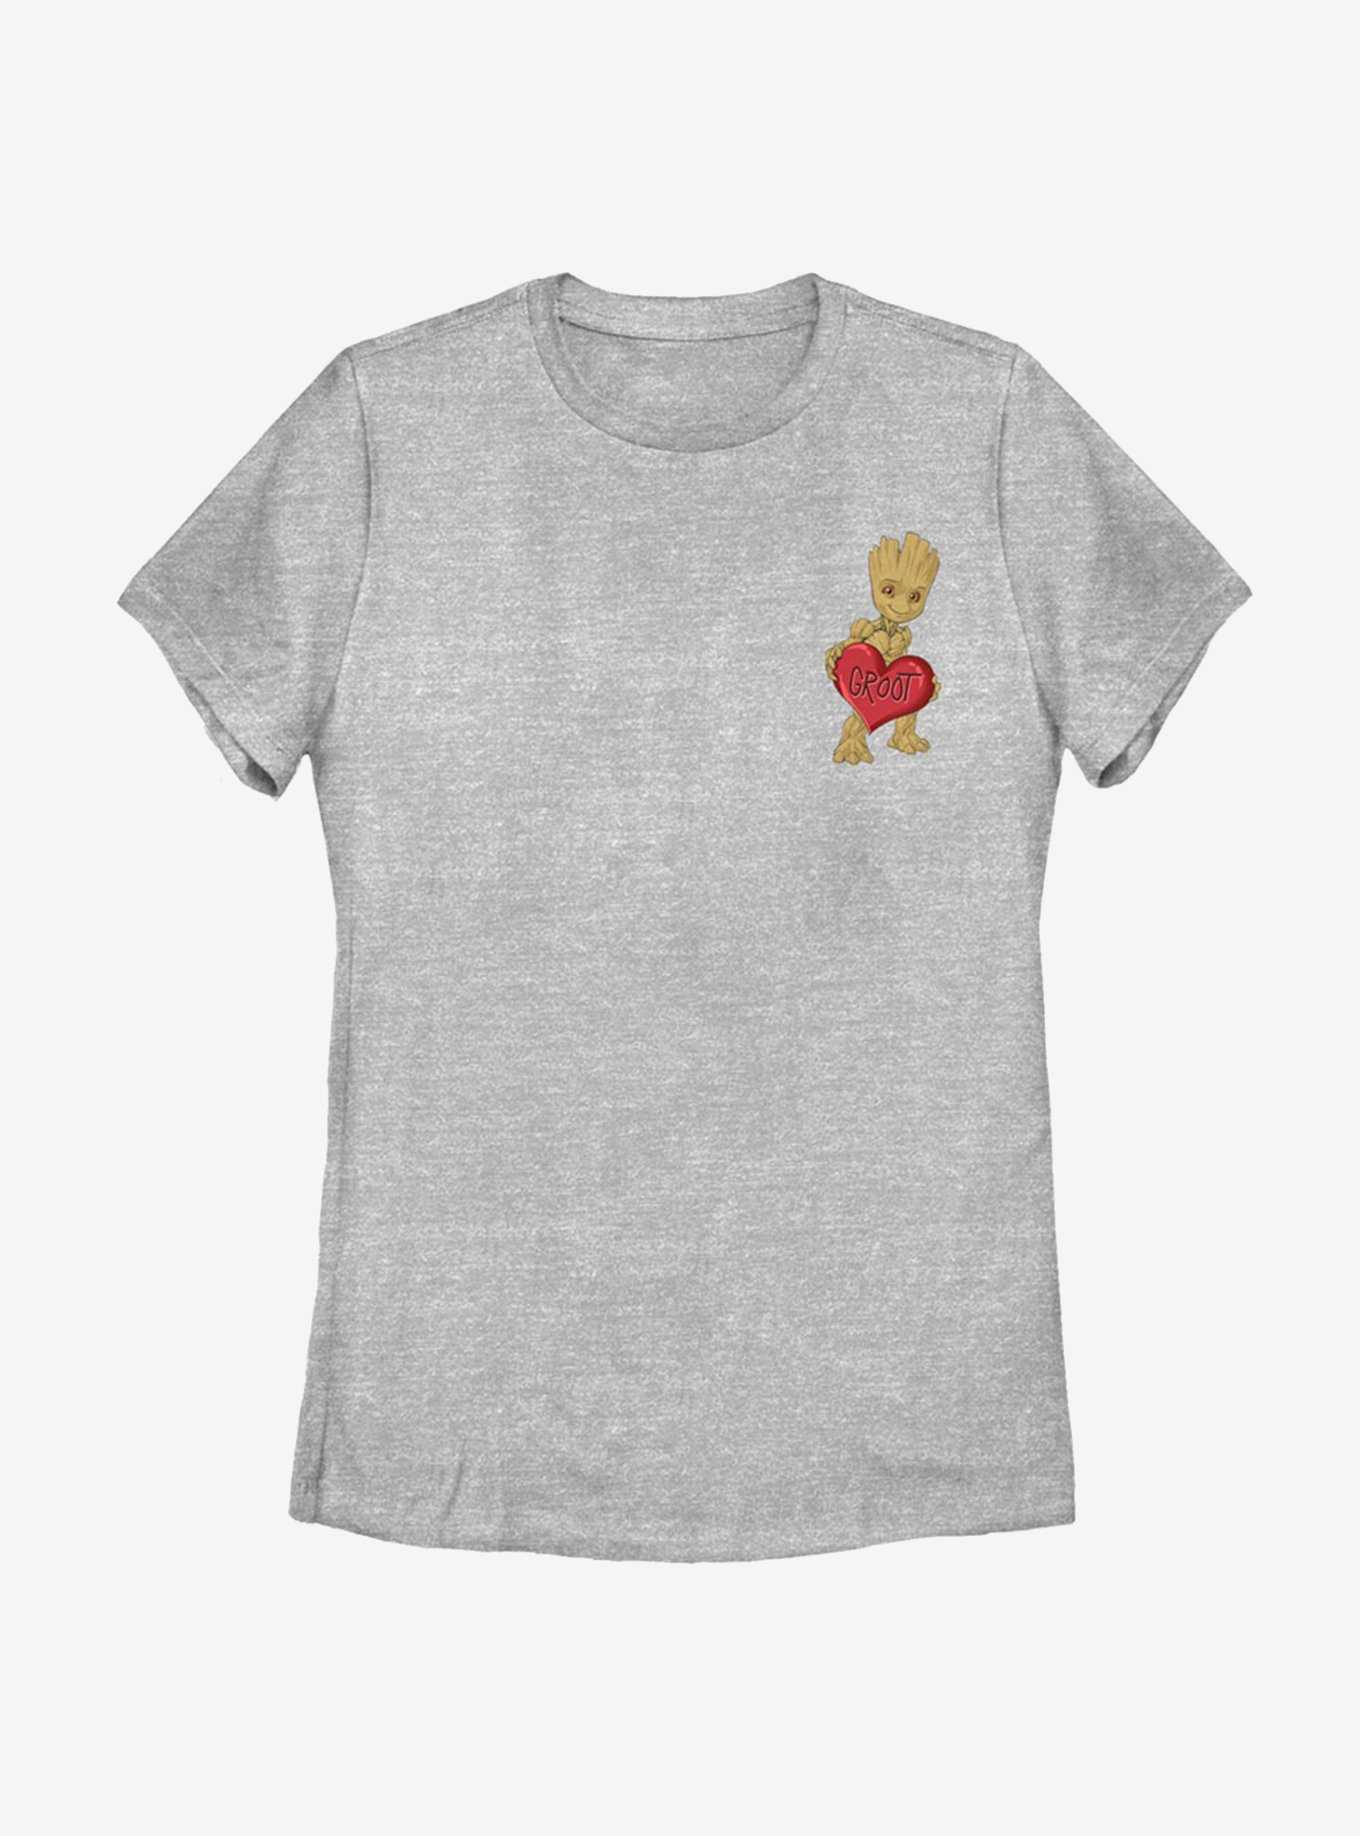 Marvel Guardians Of The Galaxy Groot Heart Womens T-Shirt, , hi-res